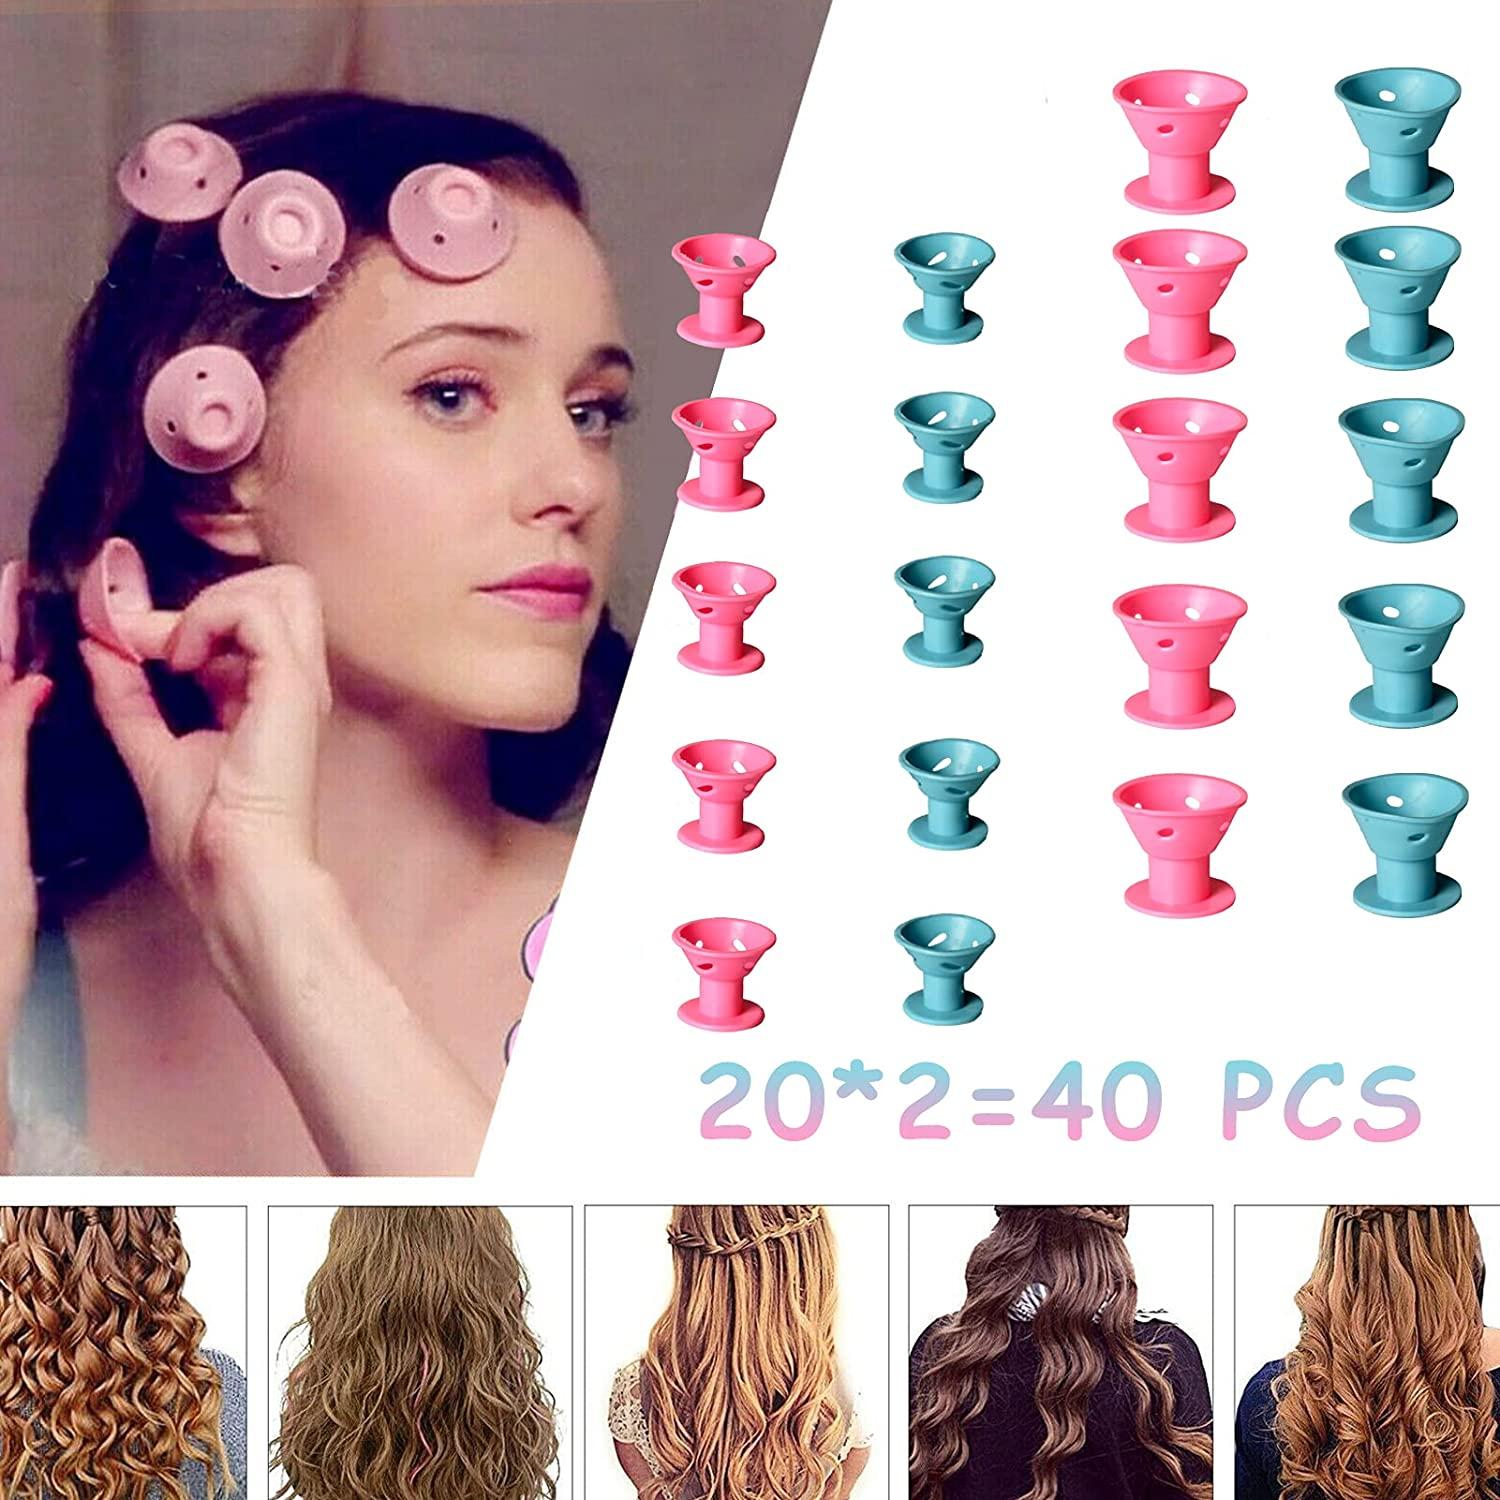 40 Pcs Magic Hair Rollers, Smilco Silicone Hair Curlers Set Including 20  Large and 20 Small for Women Girls (Pink&Blue)